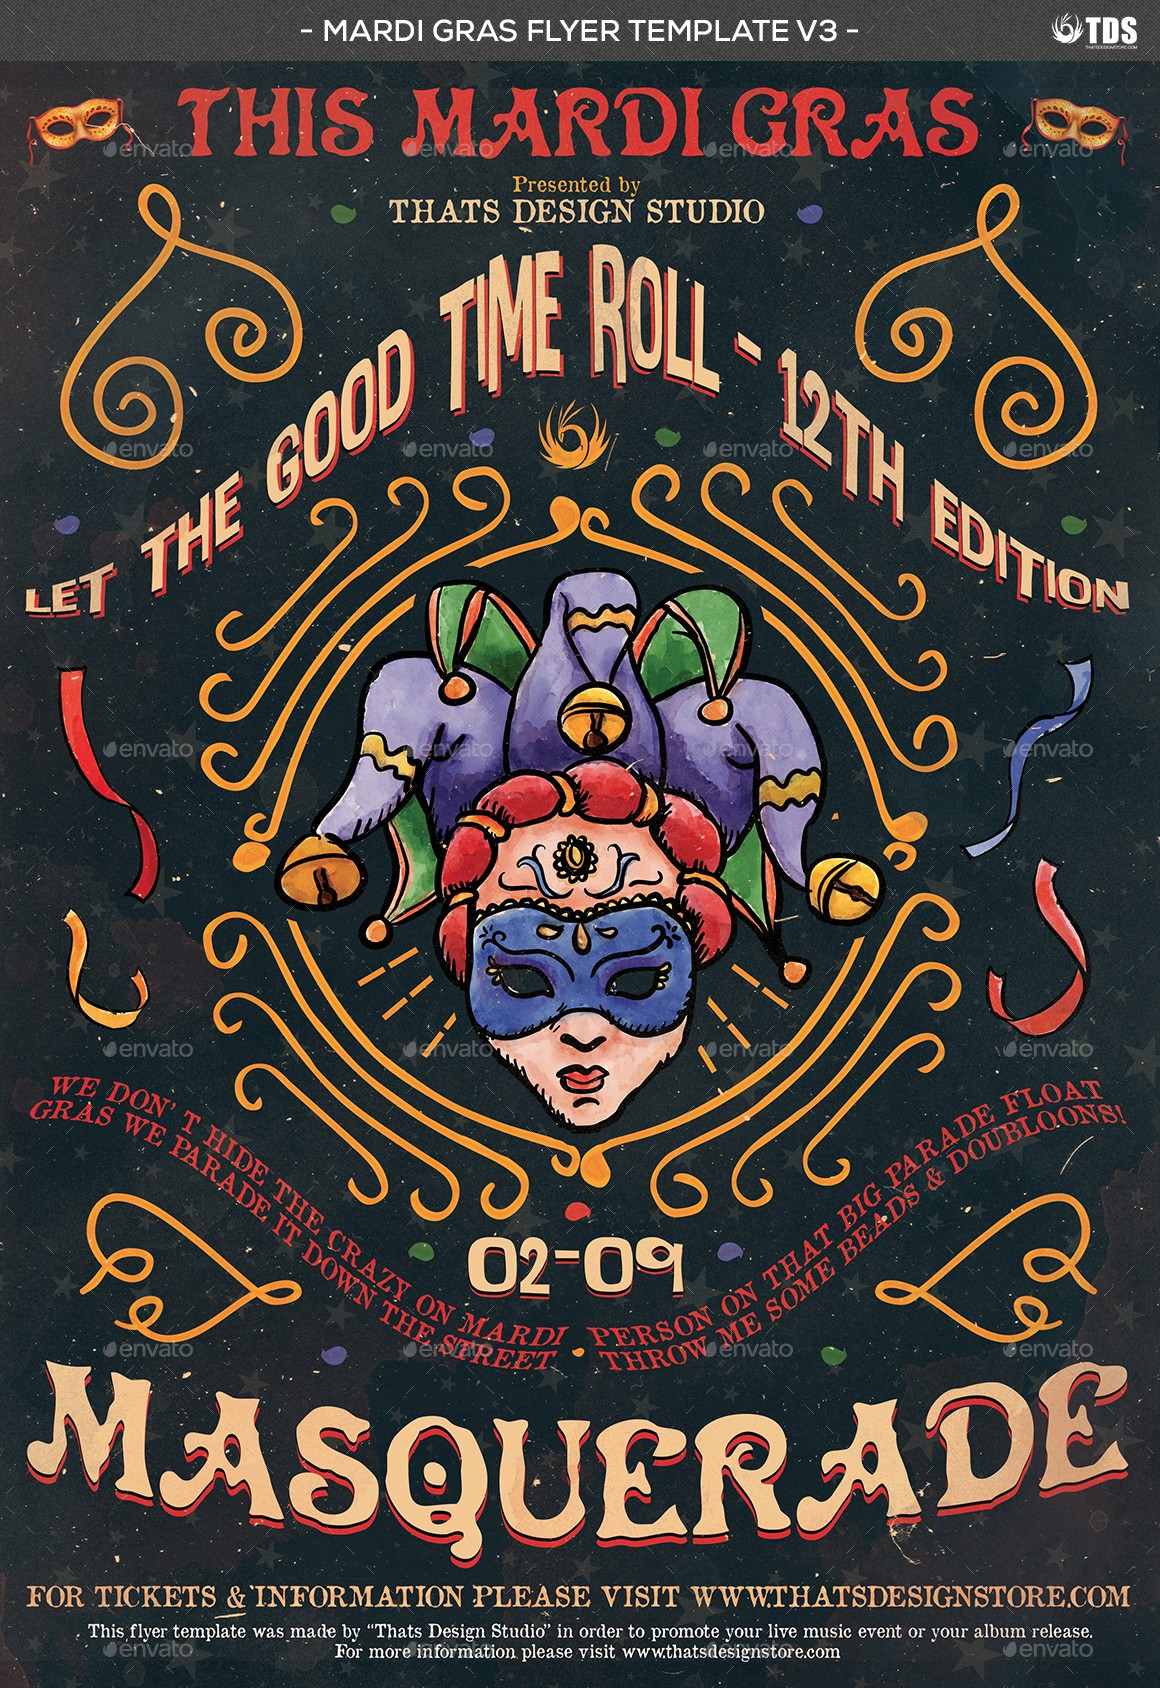 Mardi Gras Flyer Template V3 By Lou606 GraphicRiver Background